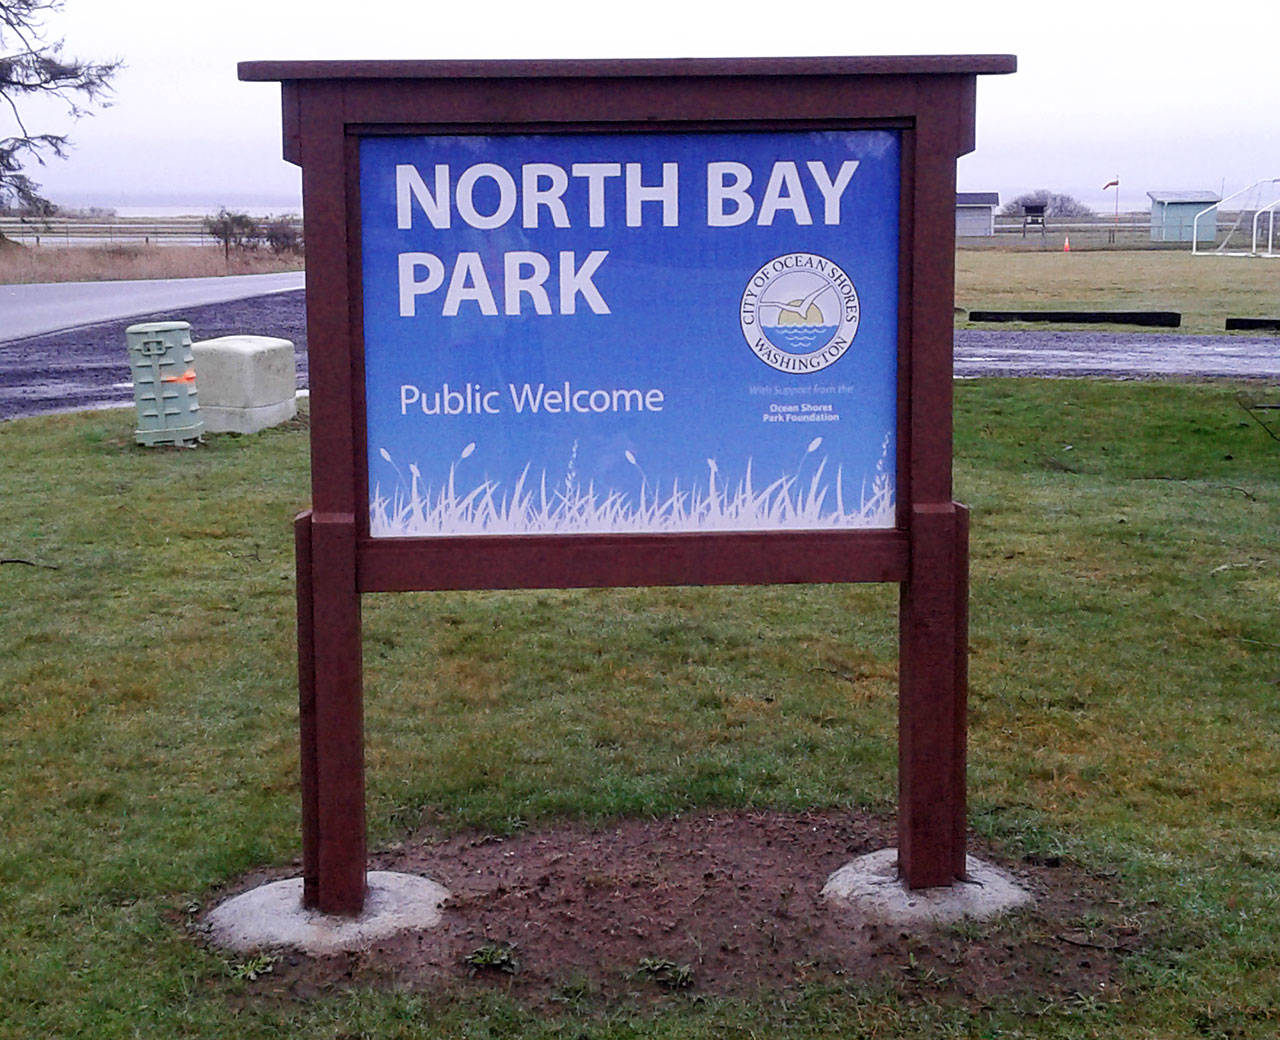 New parks sign prototype now up at North Bay